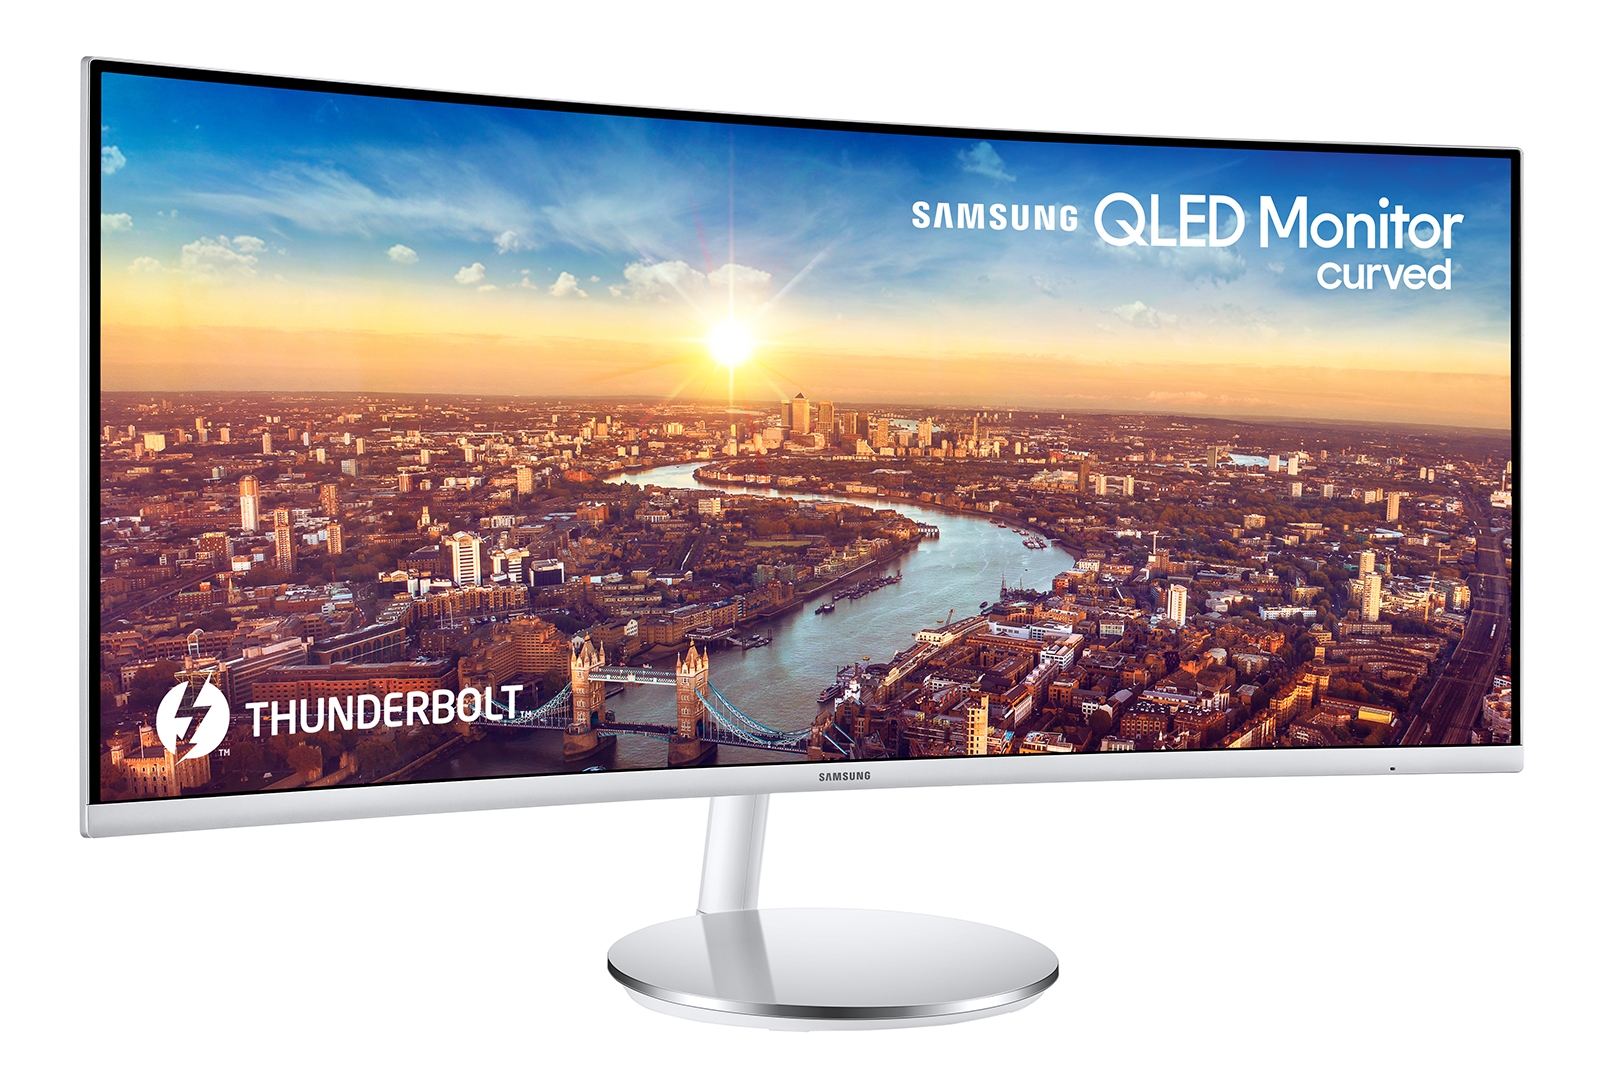 Thumbnail image of 34&quot; ViewFinity CJ79 WQHD QLED 100Hz Thunderbolt&#7488;&#7481; 3 Ultra Wide Curved Monitor